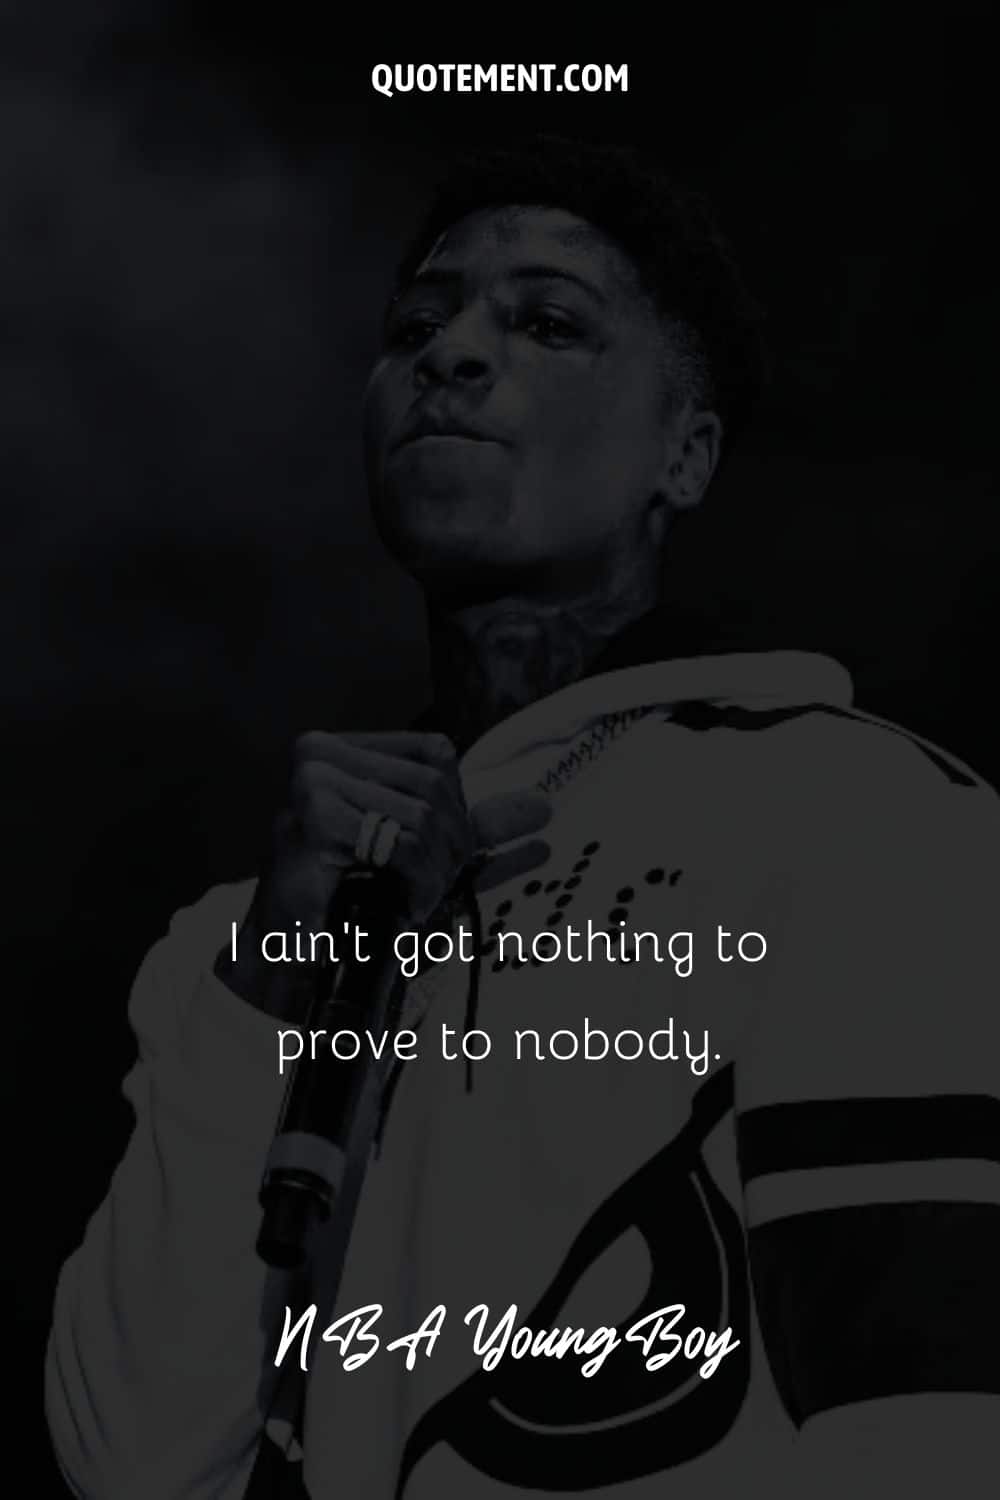 Man in a white hoodie representing nba youngboy quote